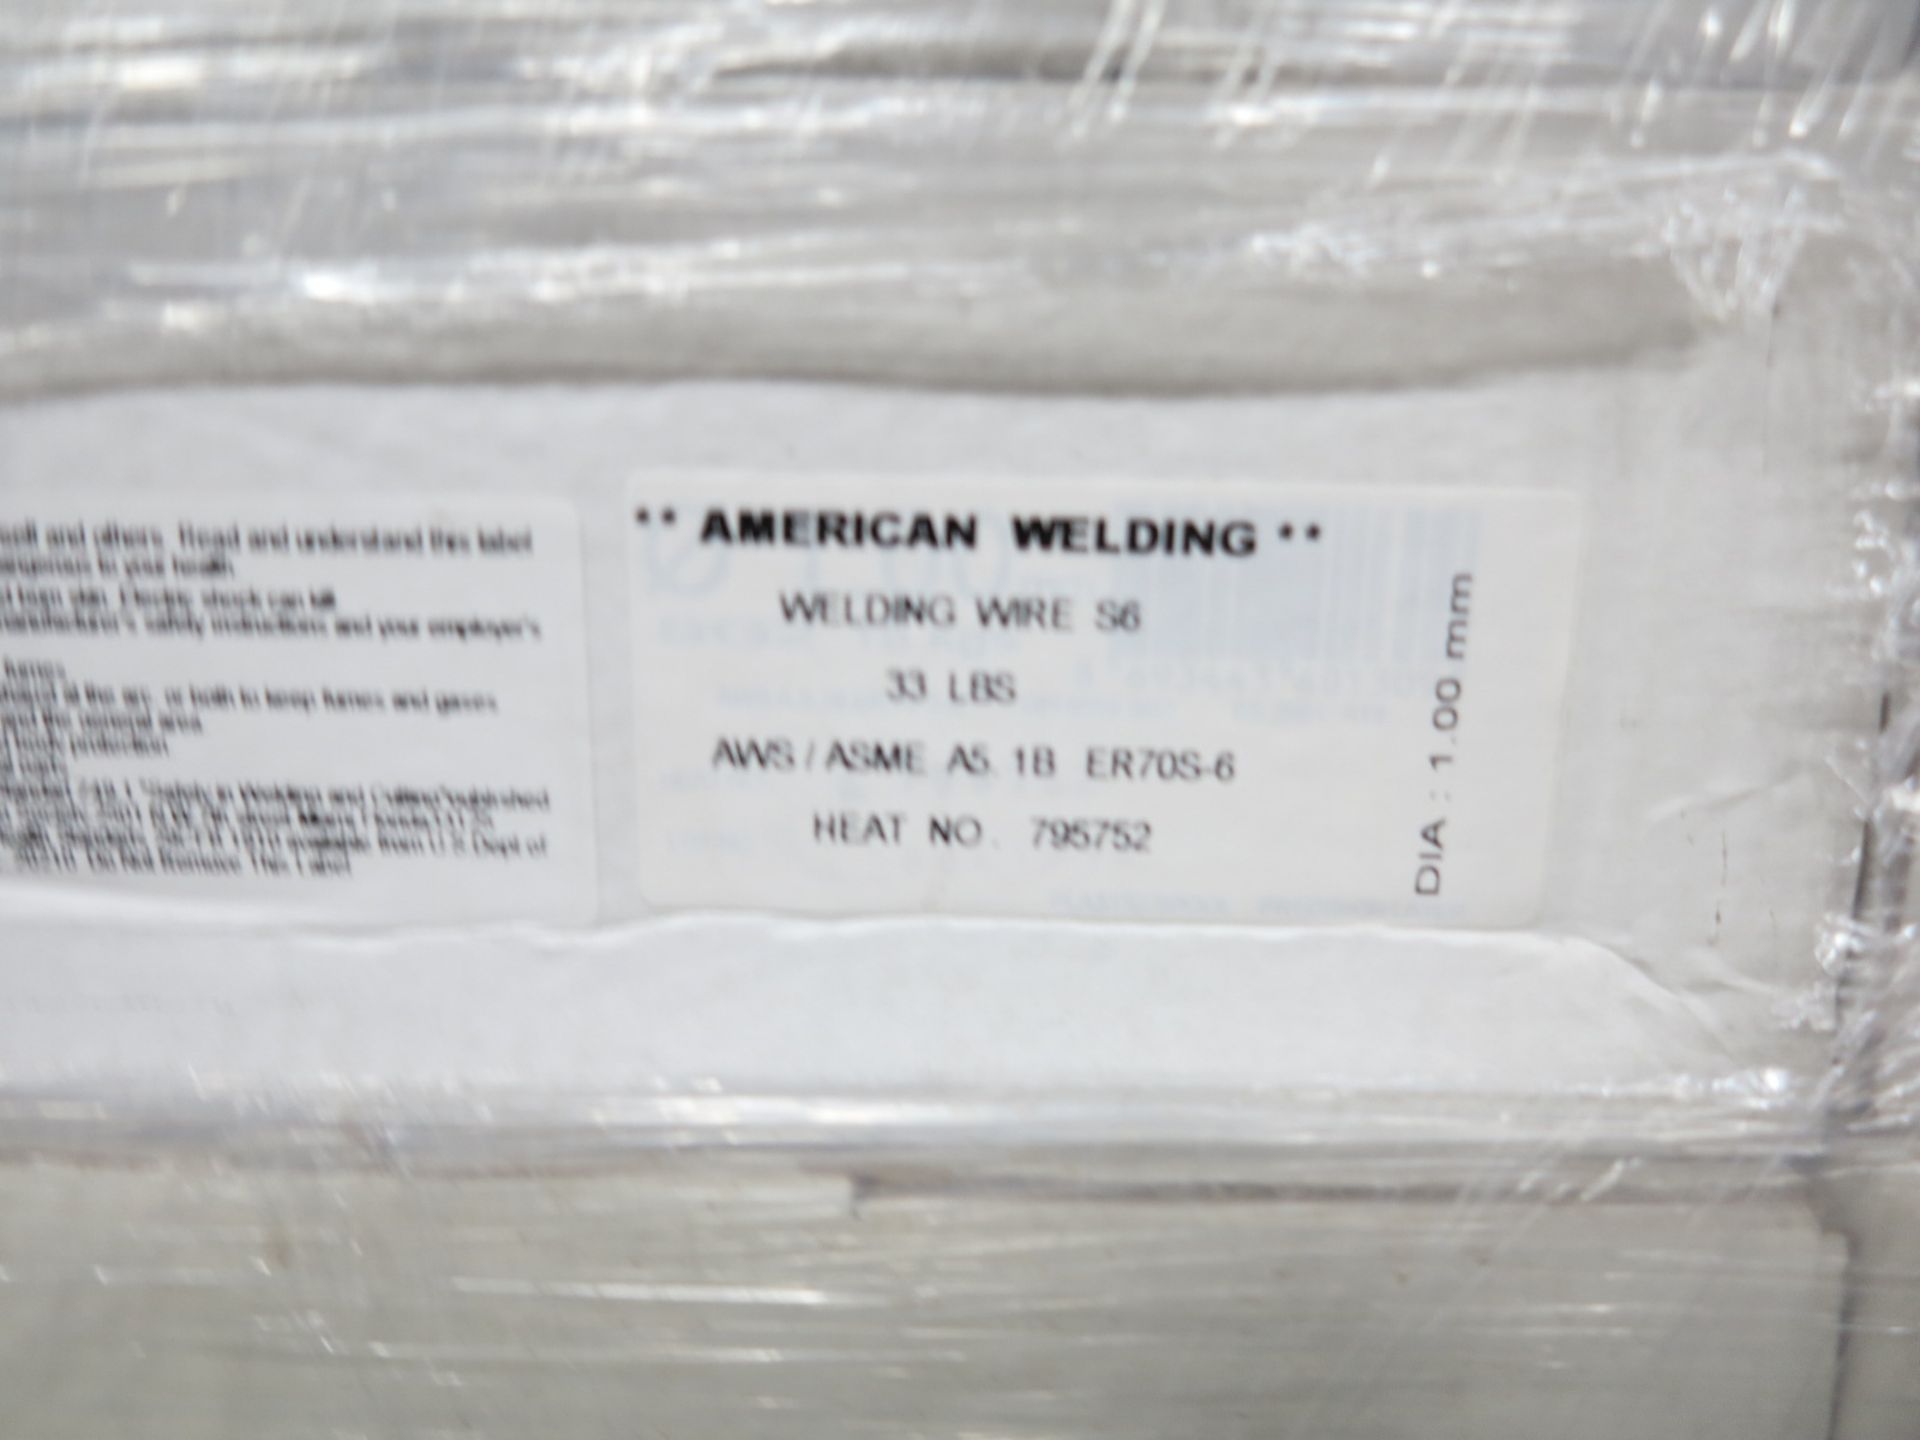 LOT - PALLET OF AMERICAN WELDING WIRE, S6, DIA. 1MM, 108 BOXES